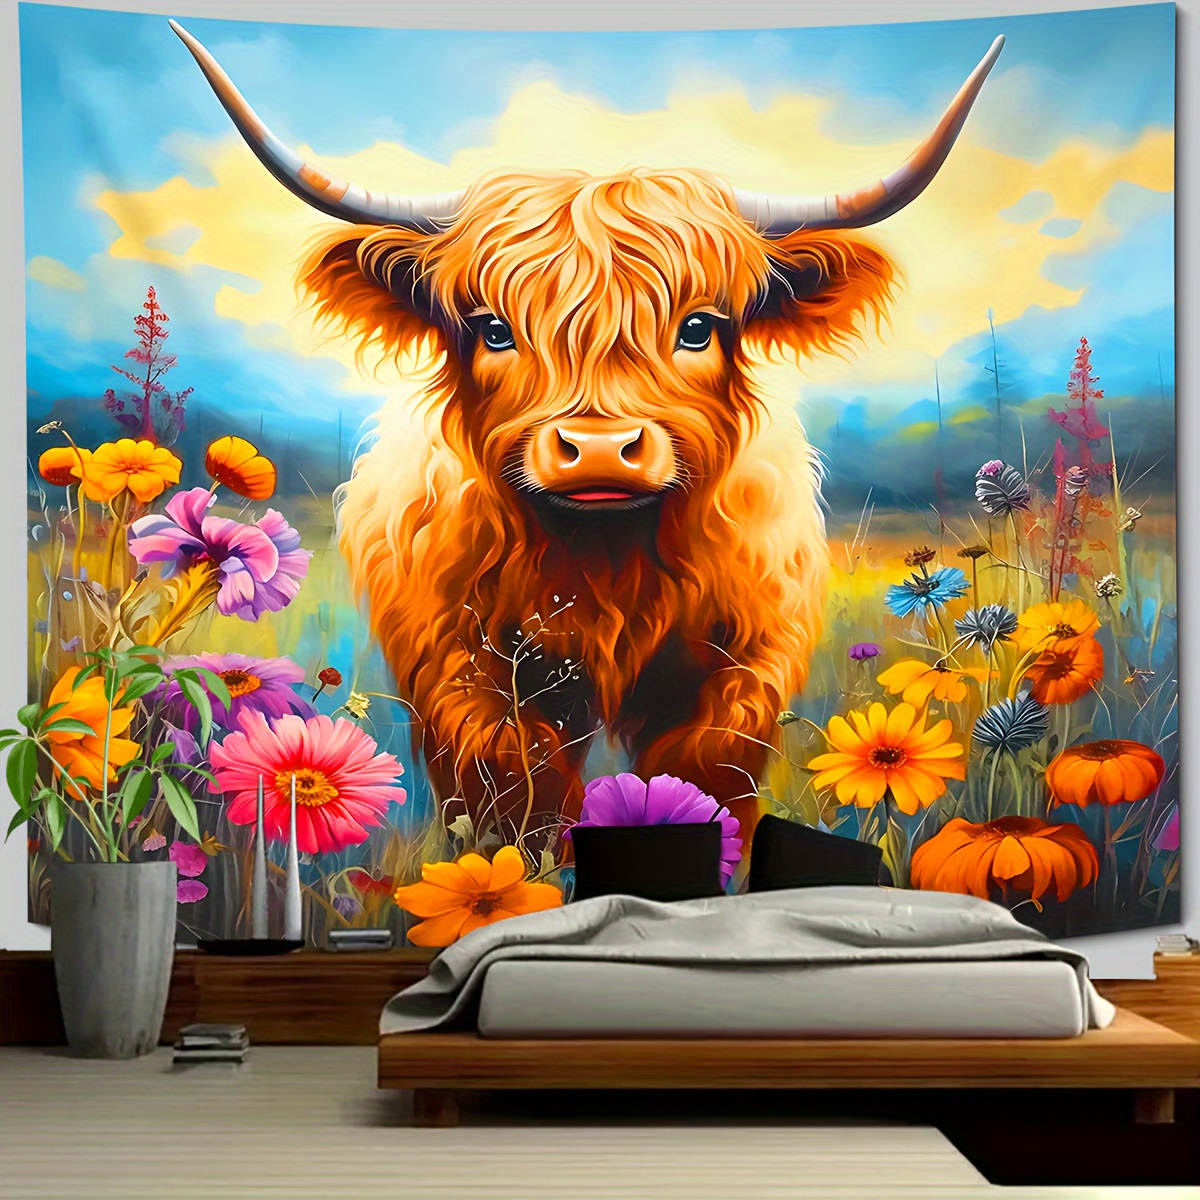 

Highland Cow Tapestry Wall Hanging, Animal Print Polyester Woven Decorative Tapestry For Living Room, Nature-inspired Atmosphere Backdrop With Free Installation Accessories - Indoor Use Only